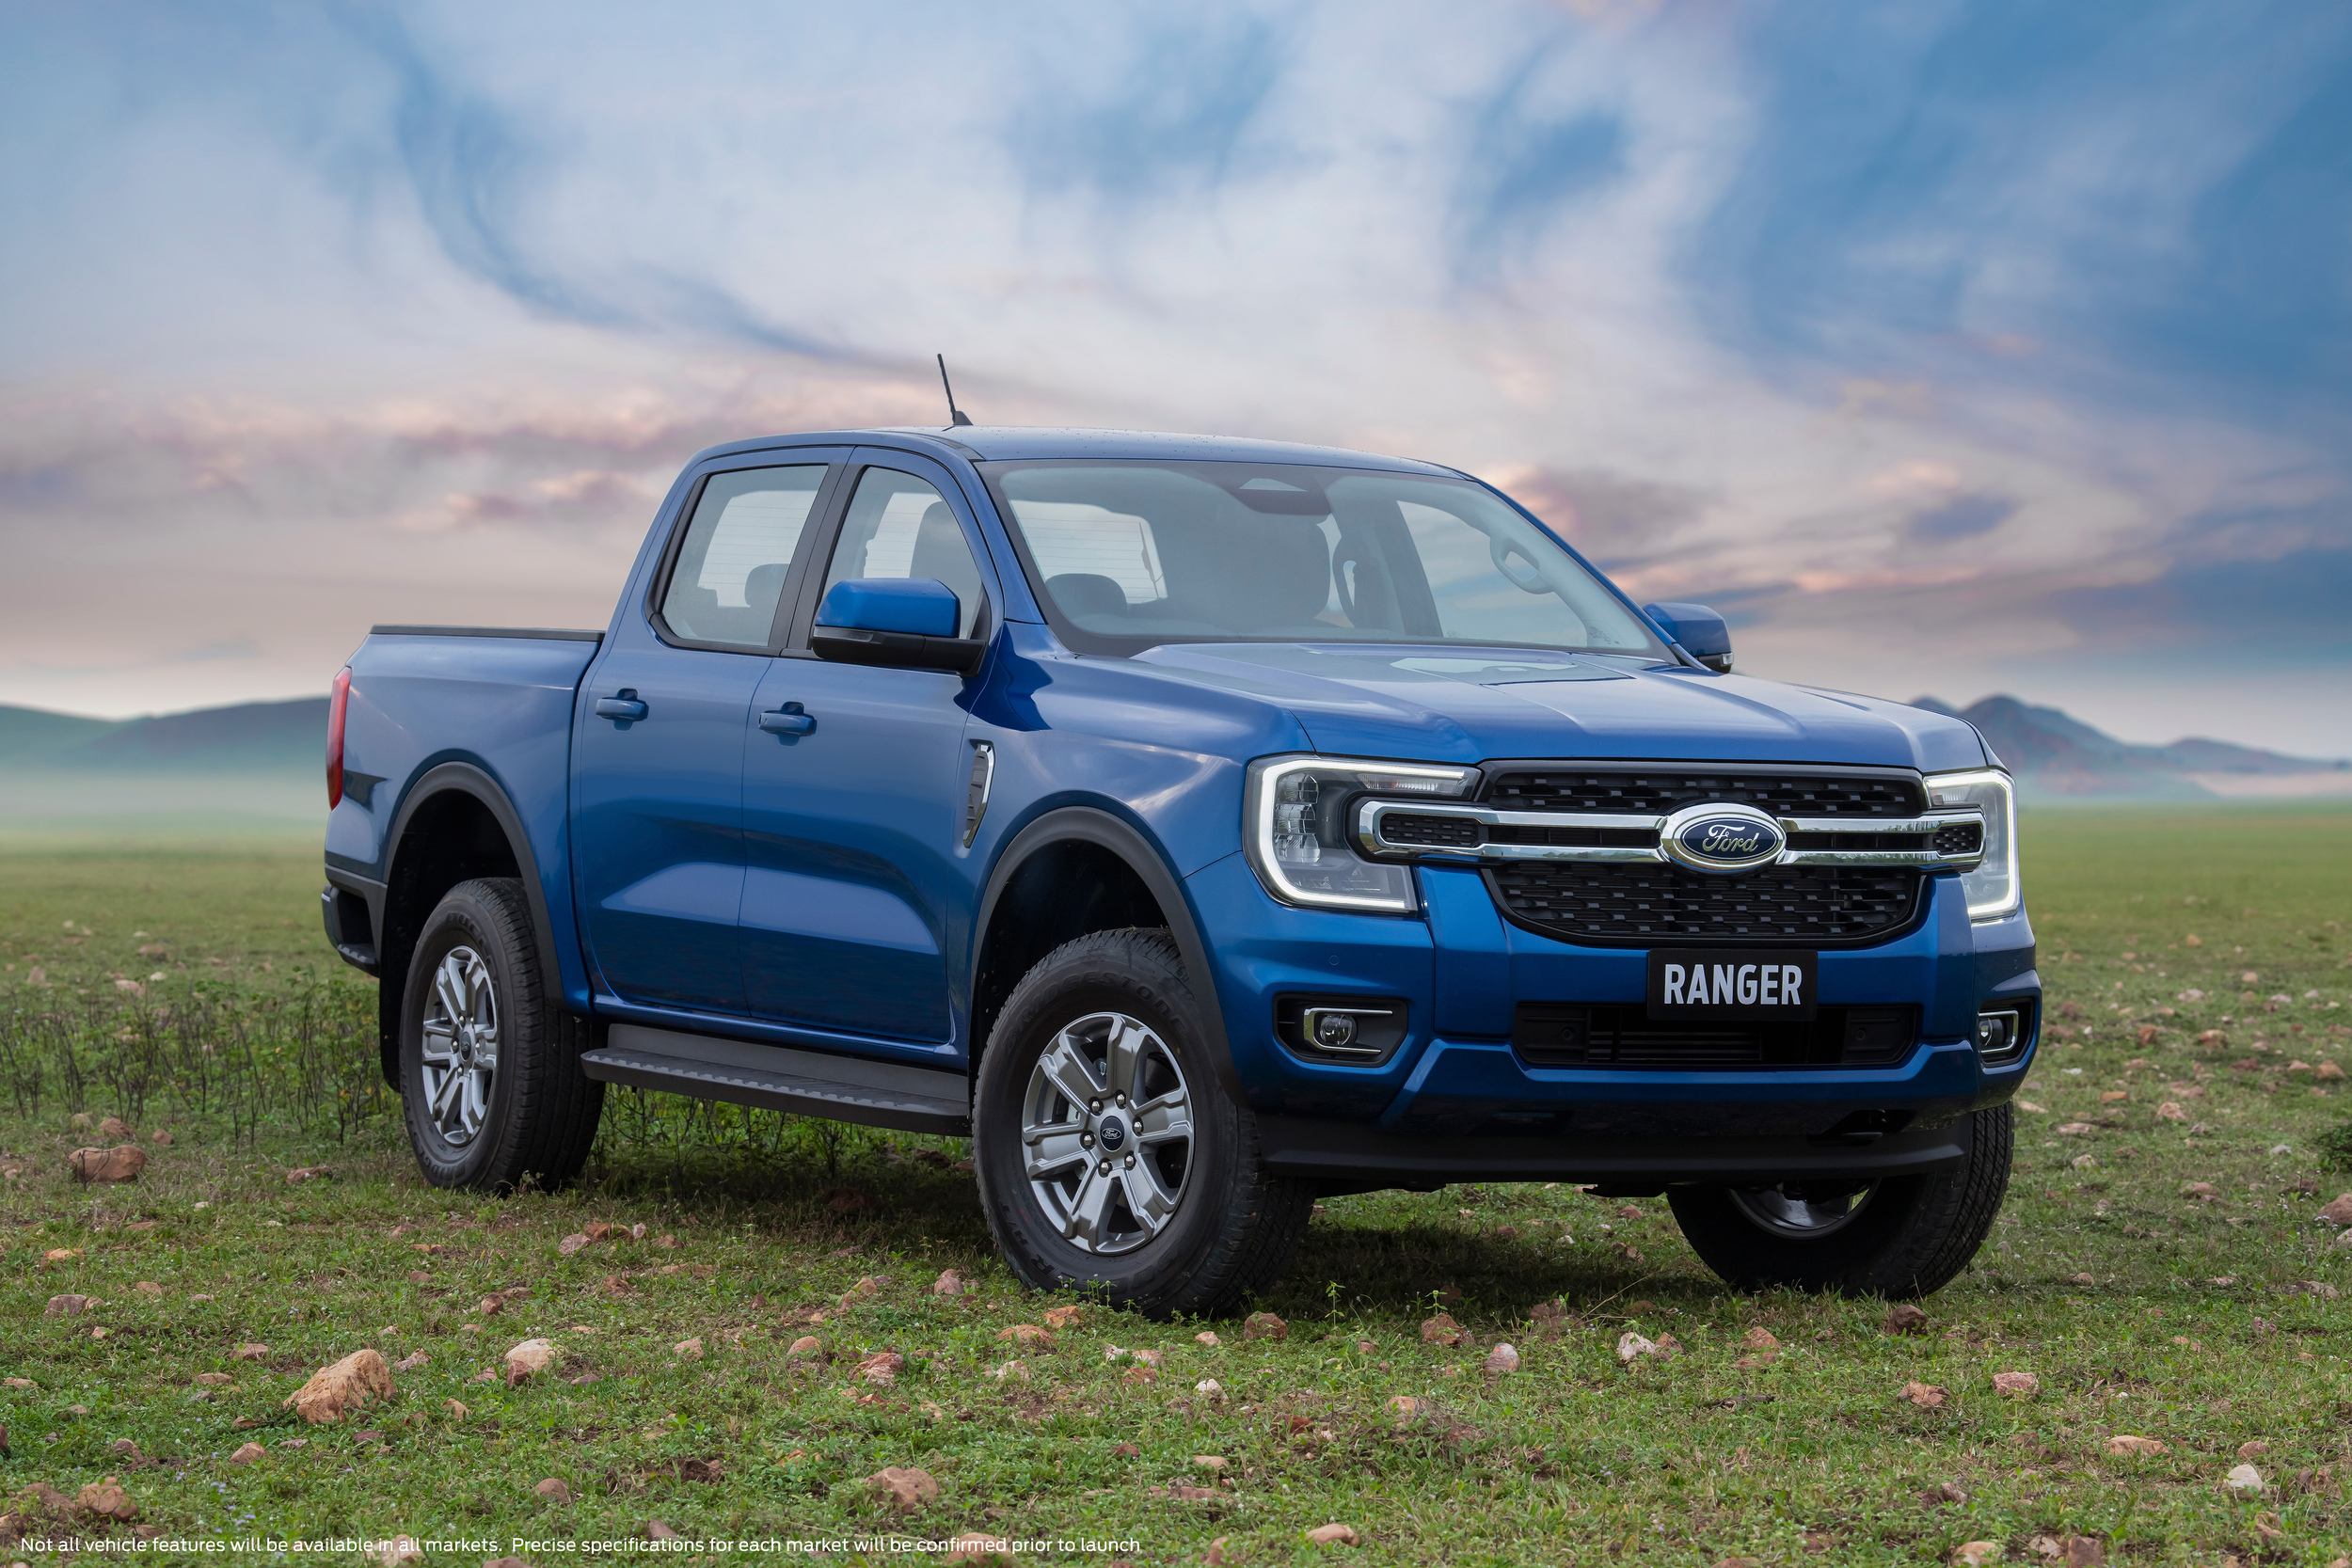 Next-generation Ford Ranger revealed with deliveries starting from 2023